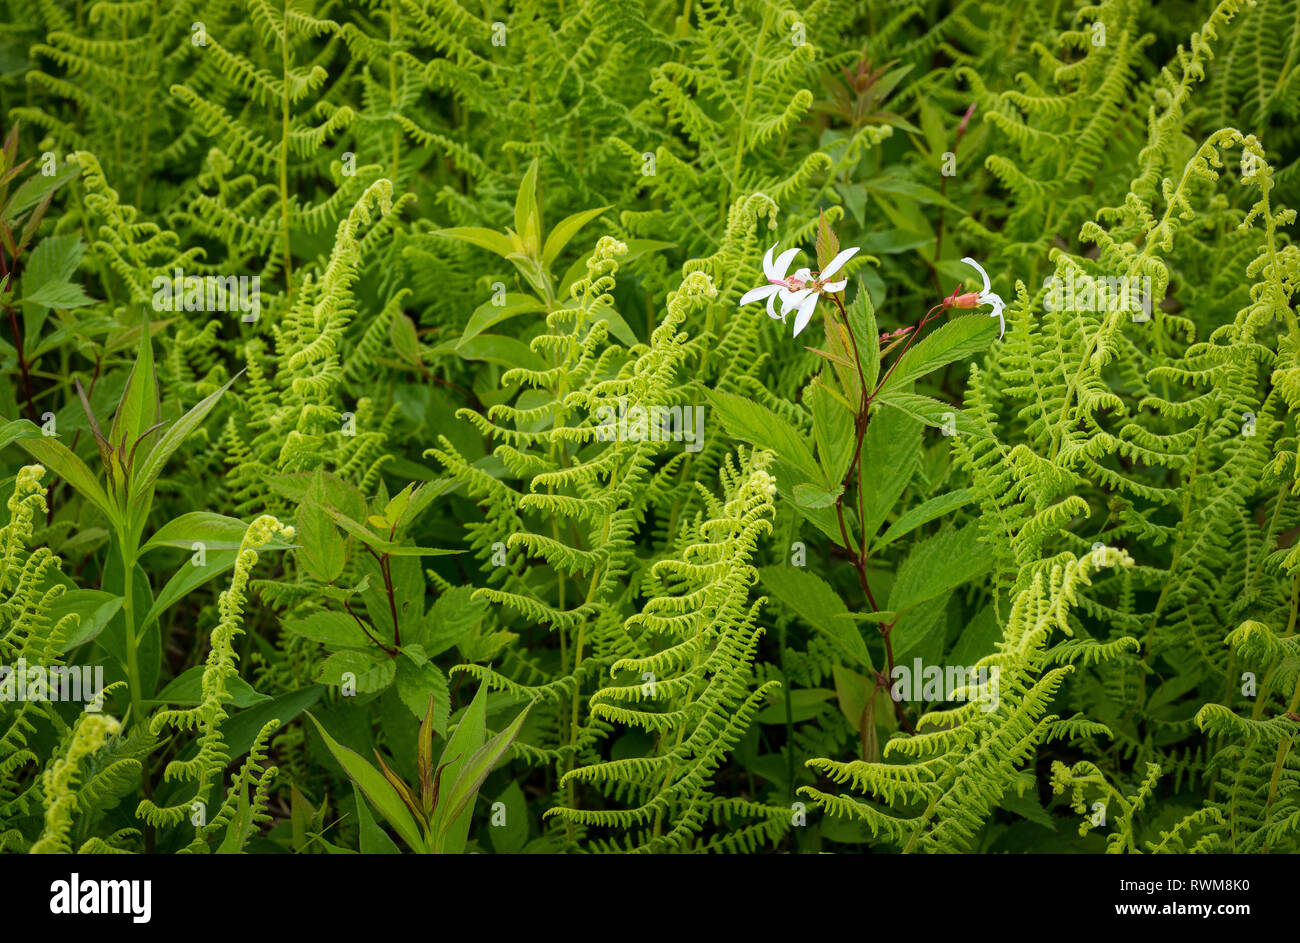 Bowman's root flowers blooming among hay-scented ferns in Big Meadows of Shenandoah National Park, Virginia. Stock Photo